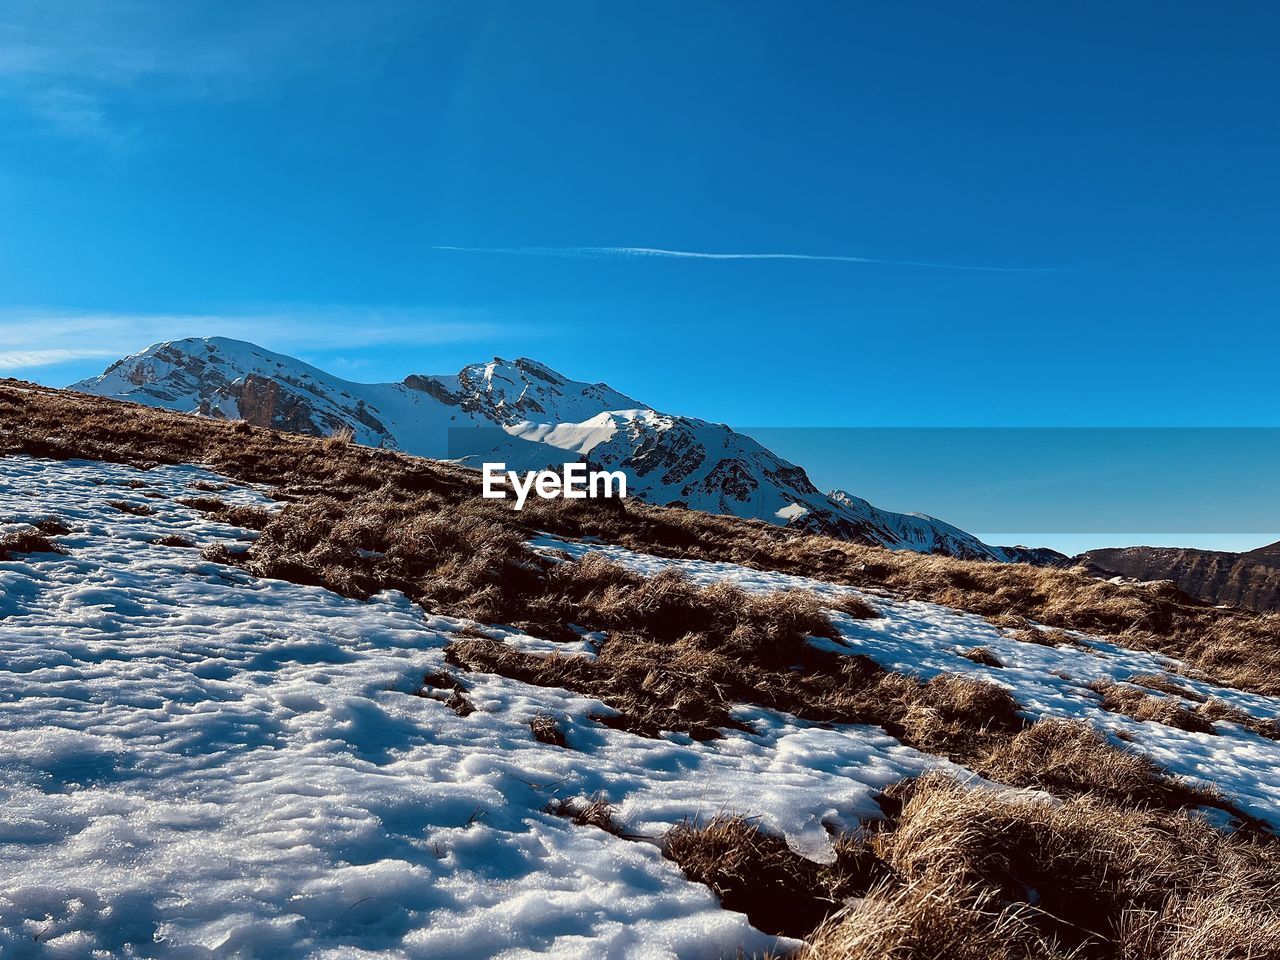 scenic view of snow covered mountains against blue sky